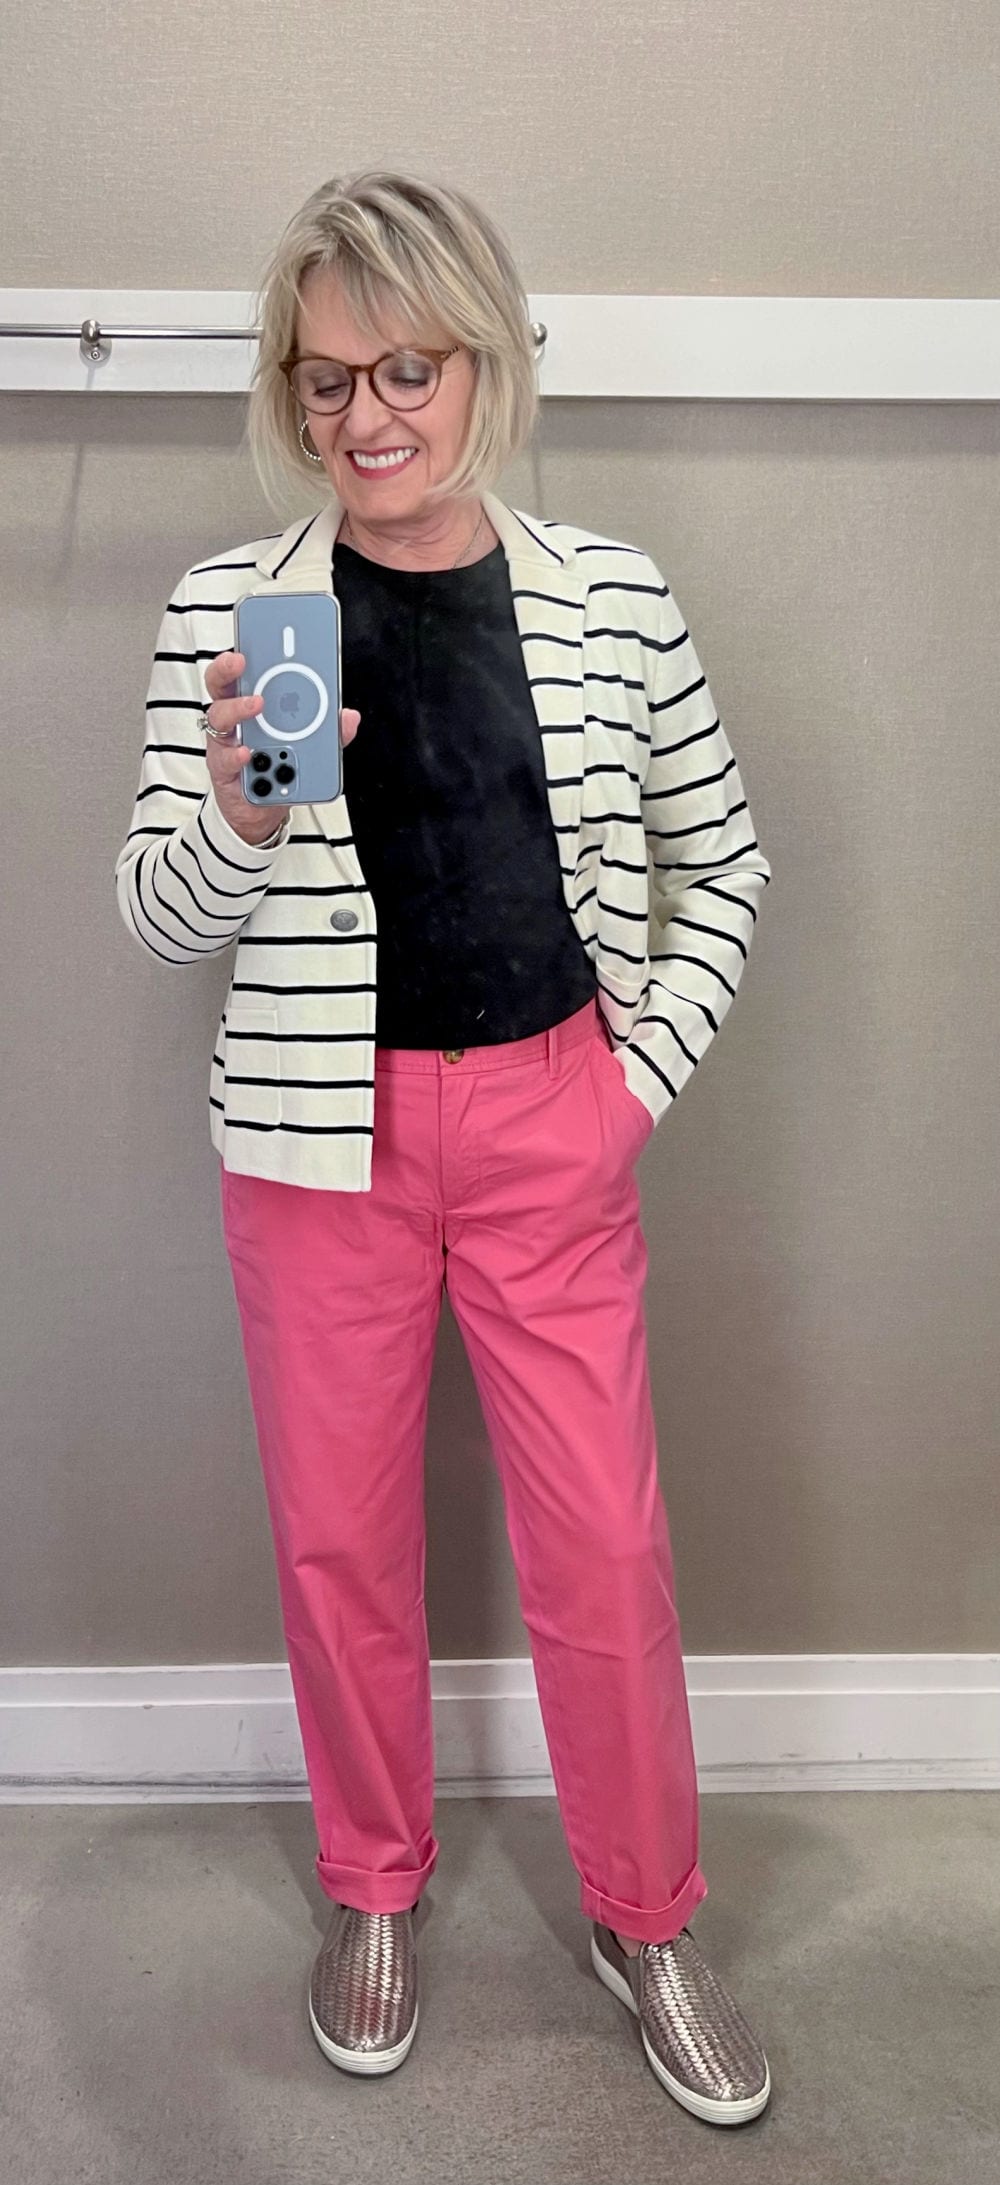 woman wearing pink chinos and striped jacket